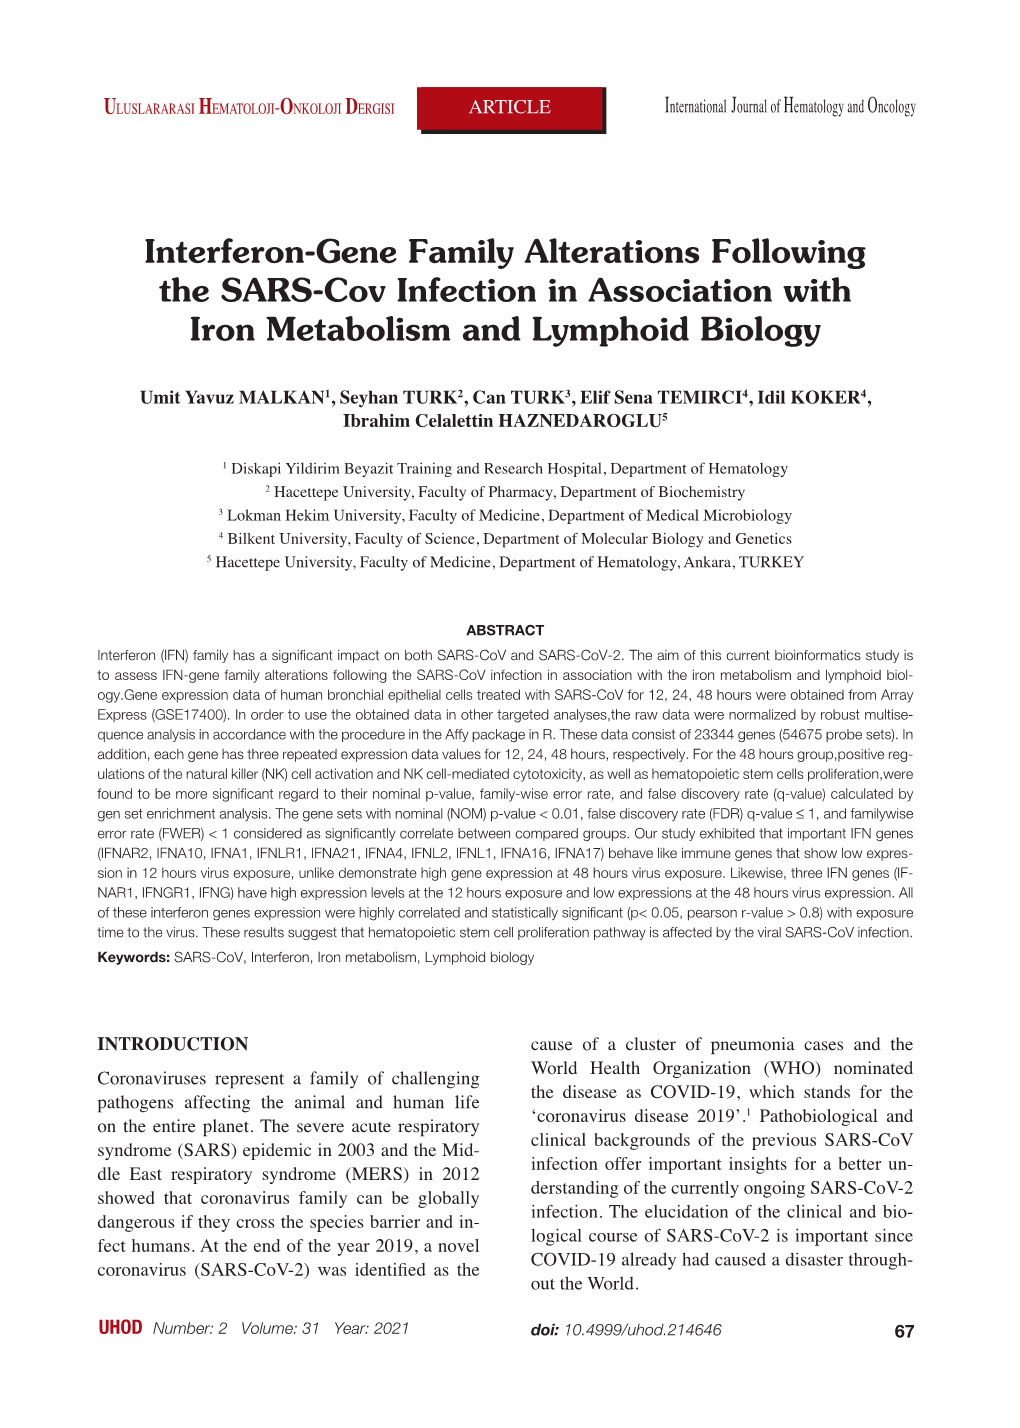 Interferon-Gene Family Alterations Following the SARS-Cov Infection in Association with Iron Metabolism and Lymphoid Biology